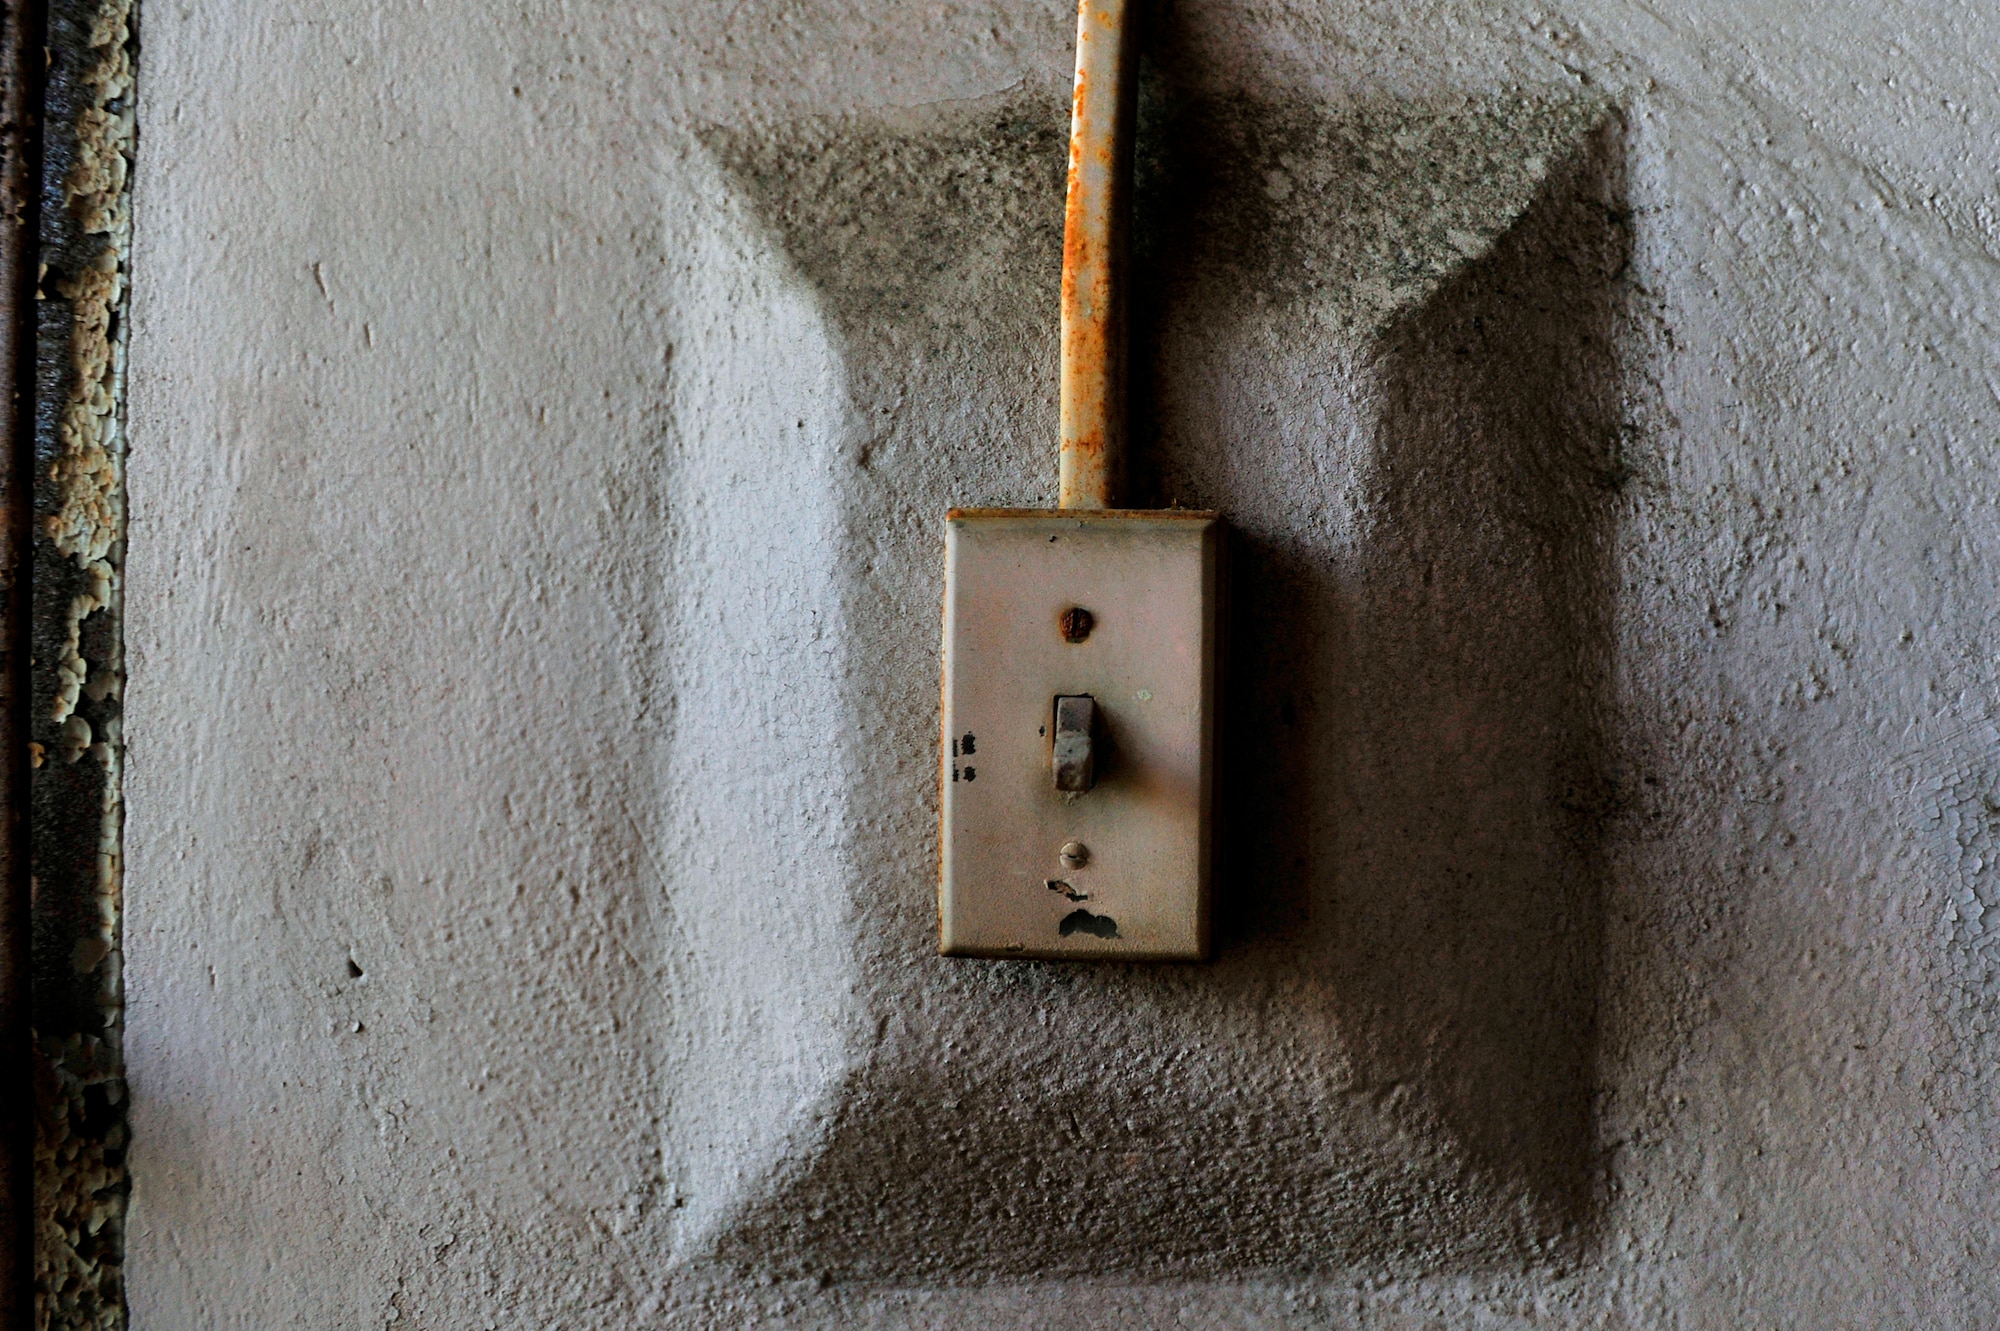 An old, weathered light switch is left in the off position after several years of use, Oct. 20, 2012, Columbia, S.C. The month of October marks National Energy Action Month, which encourages people to conserve energy. One way to aid in the conservation of energy is simply ensuring light switches are turned off when not in use. The switch in this image is located in an abandon insane asylum and no longer consumes energy as the power to the building has been turned off. (U.S. Air Force photo by Staff Sgt. Kenny Holston/Released)